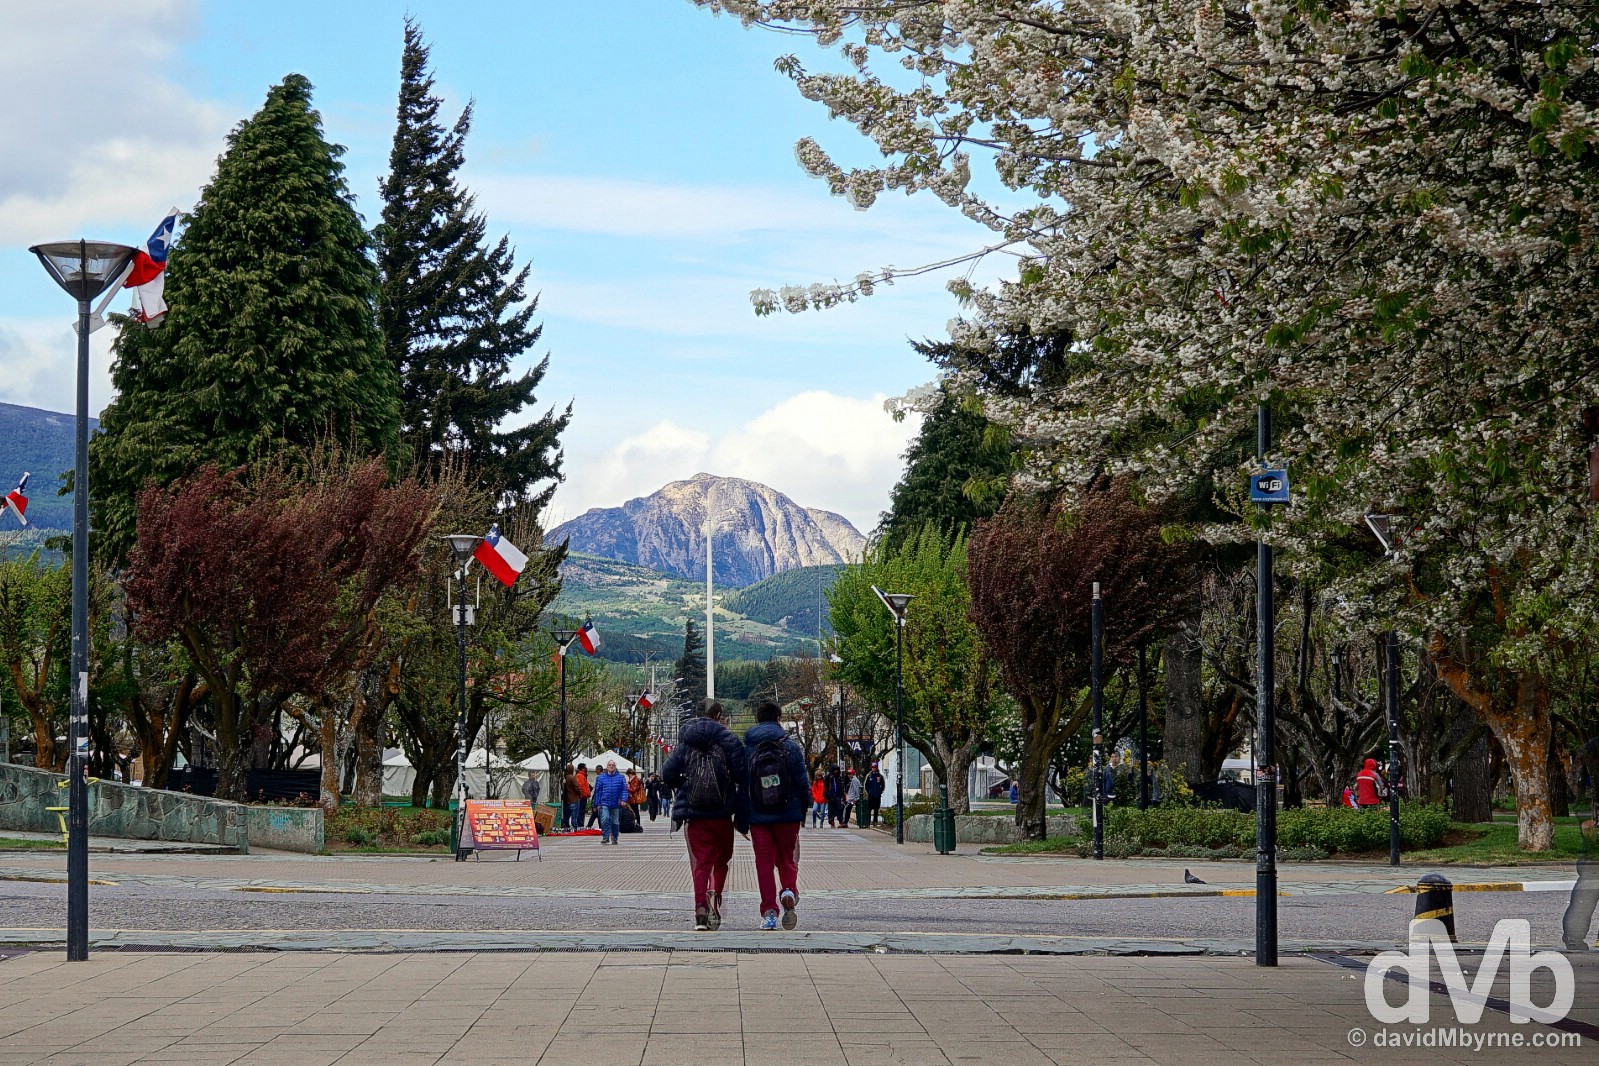 In the five-sided Plaza de Armas in Coyhaique, Aysen, Chile. October 26, 2015.